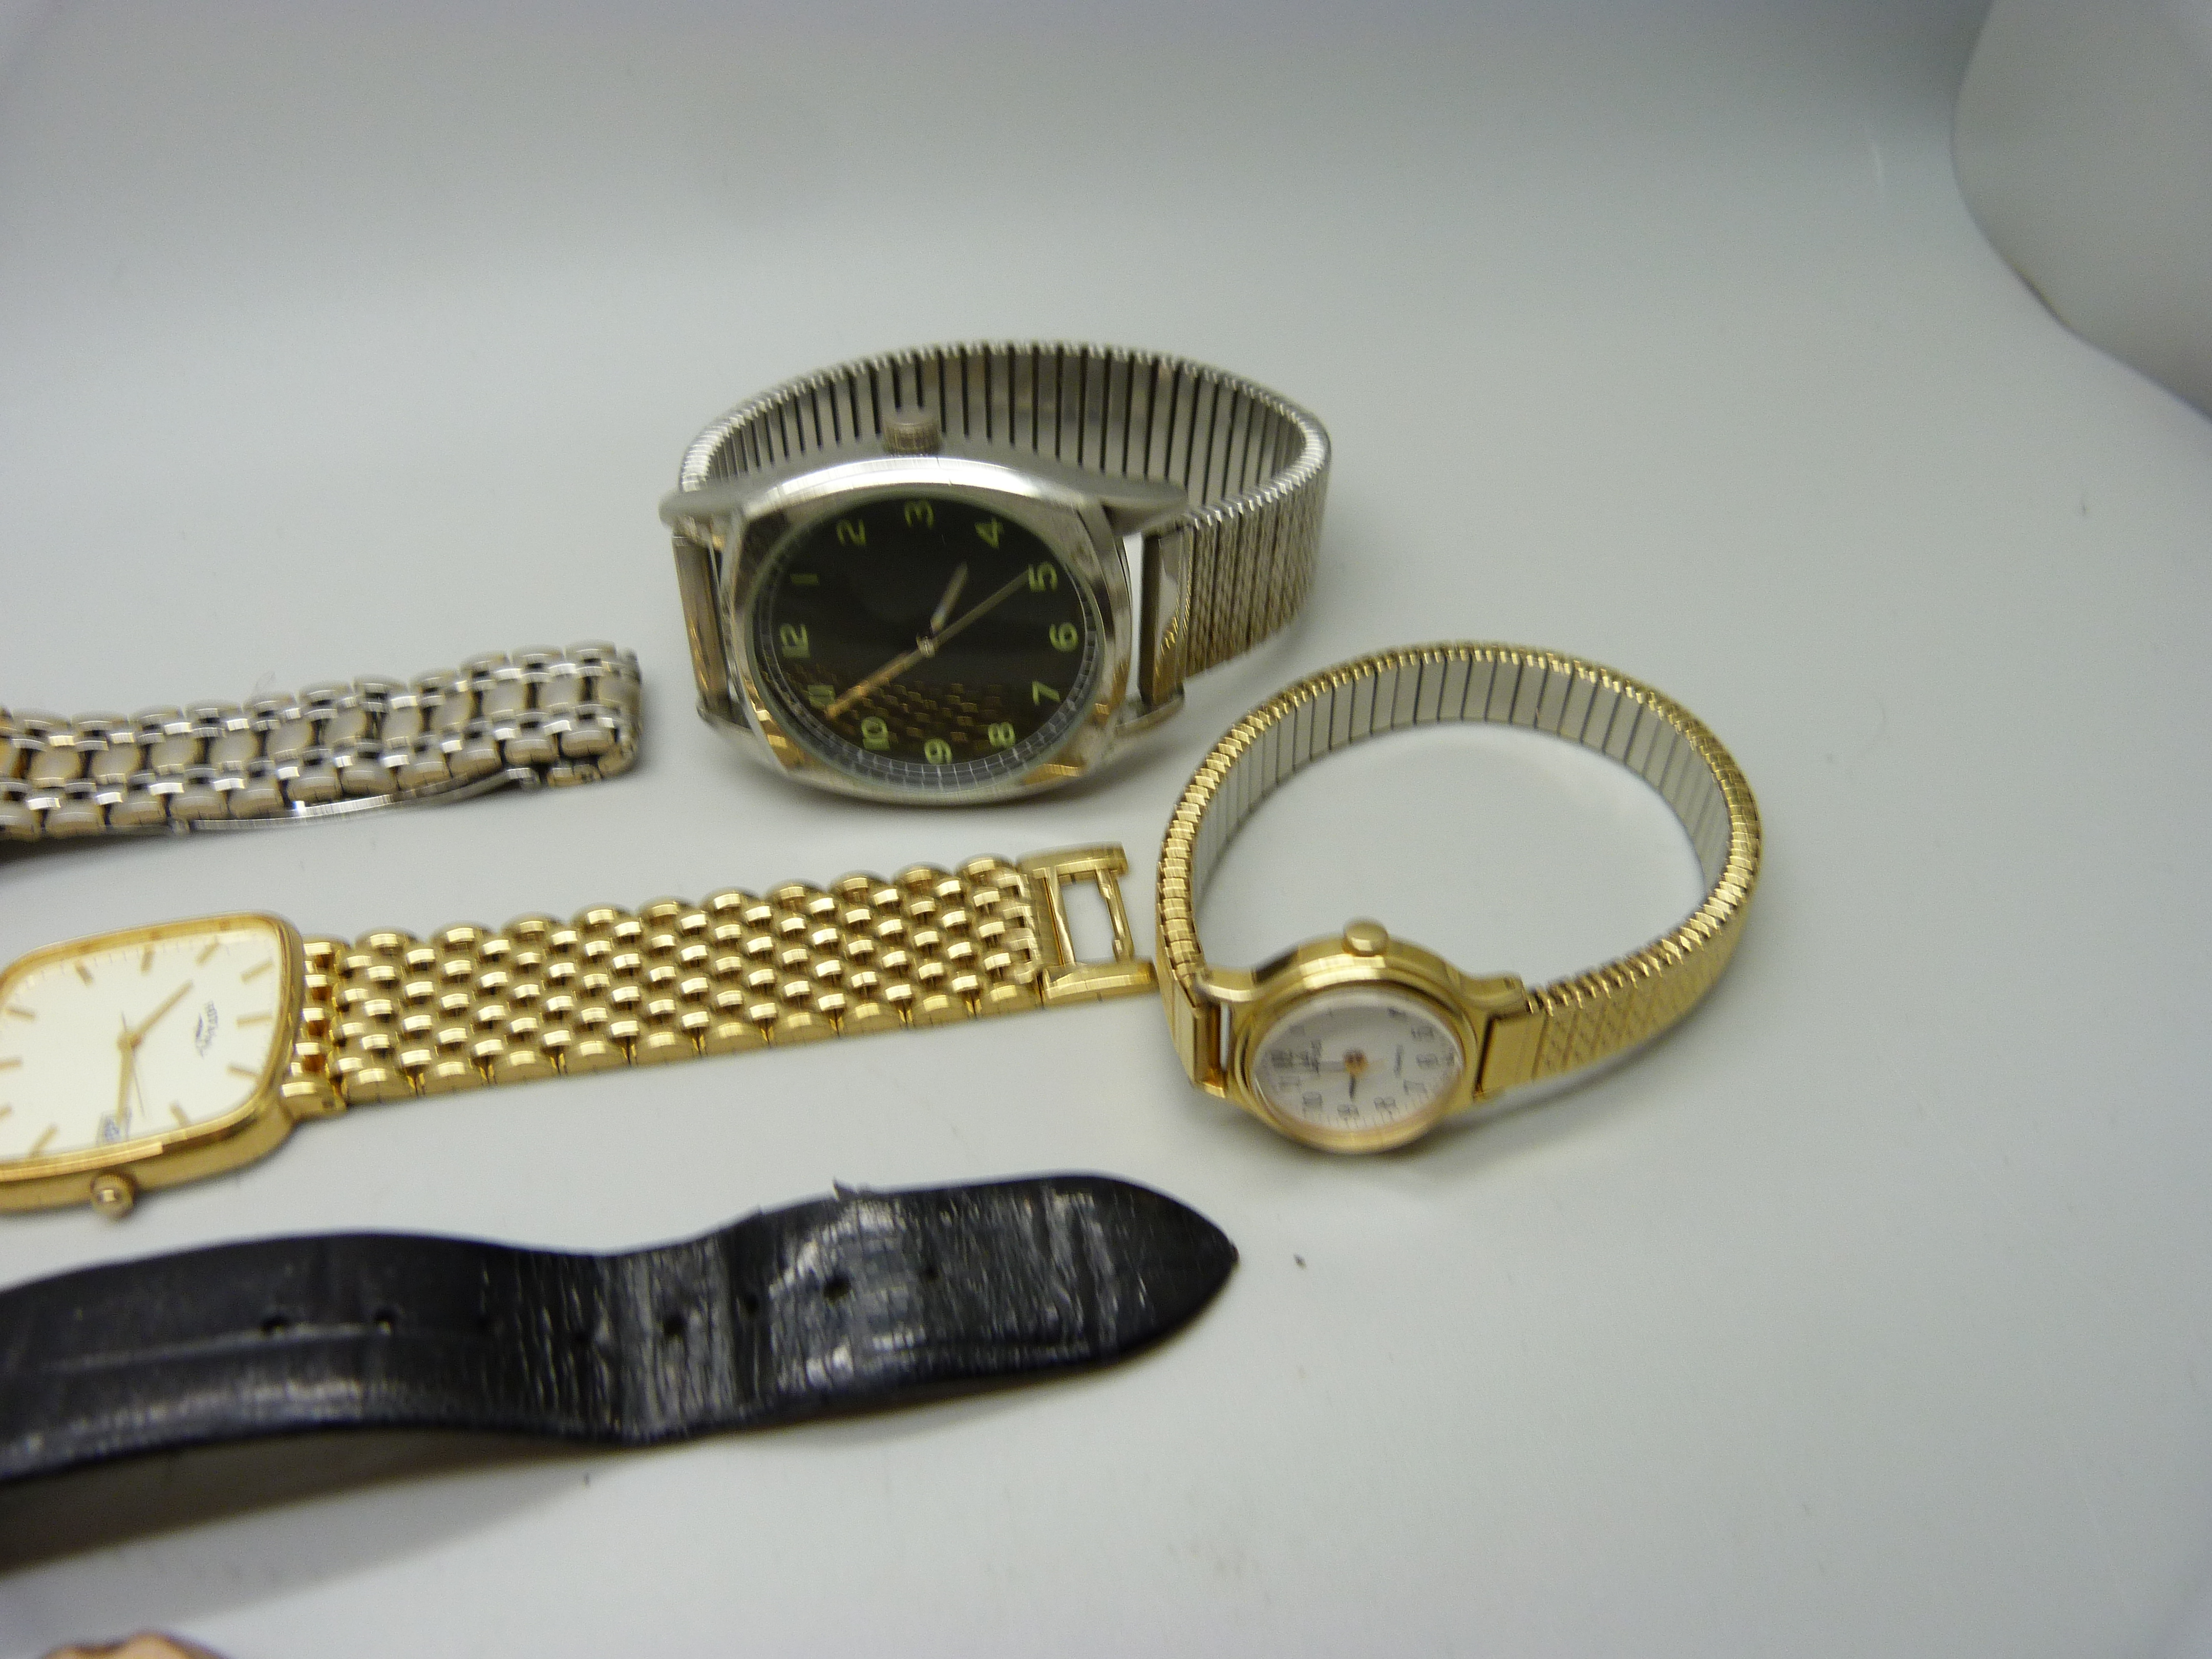 A collection of lady's and gentleman's wristwatches including Limit and Rotary - Image 4 of 4